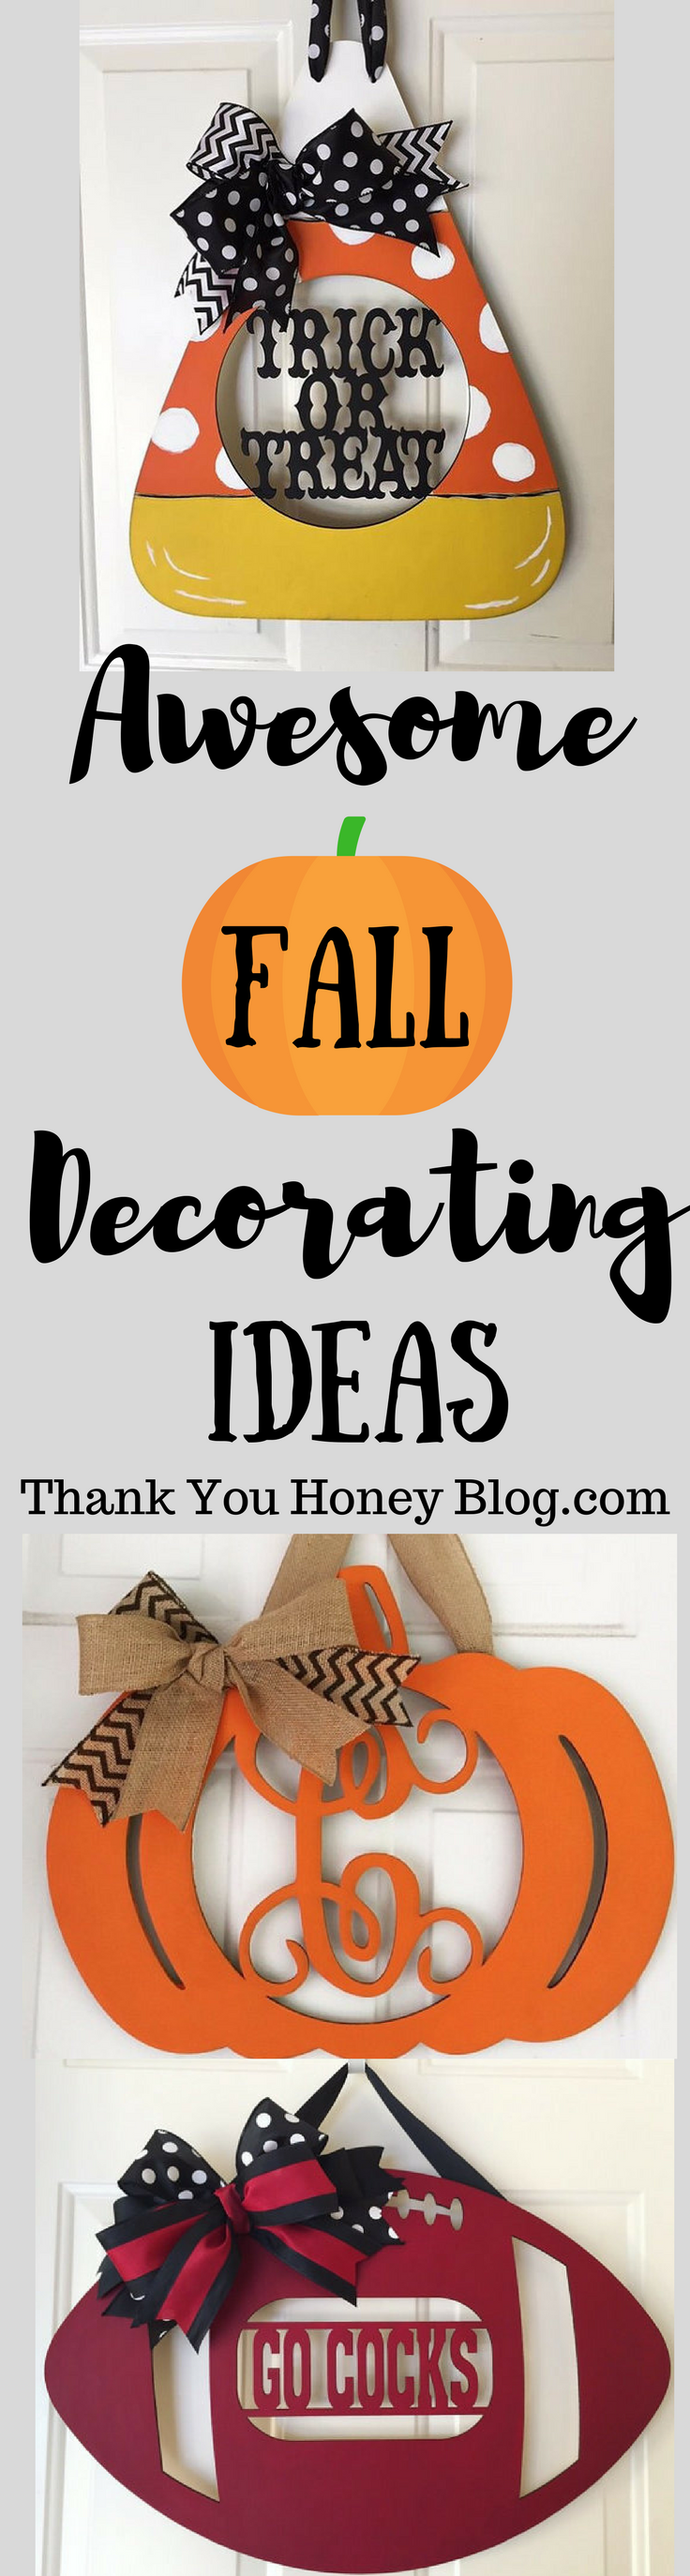 Awesome Fall Decorating Ideas